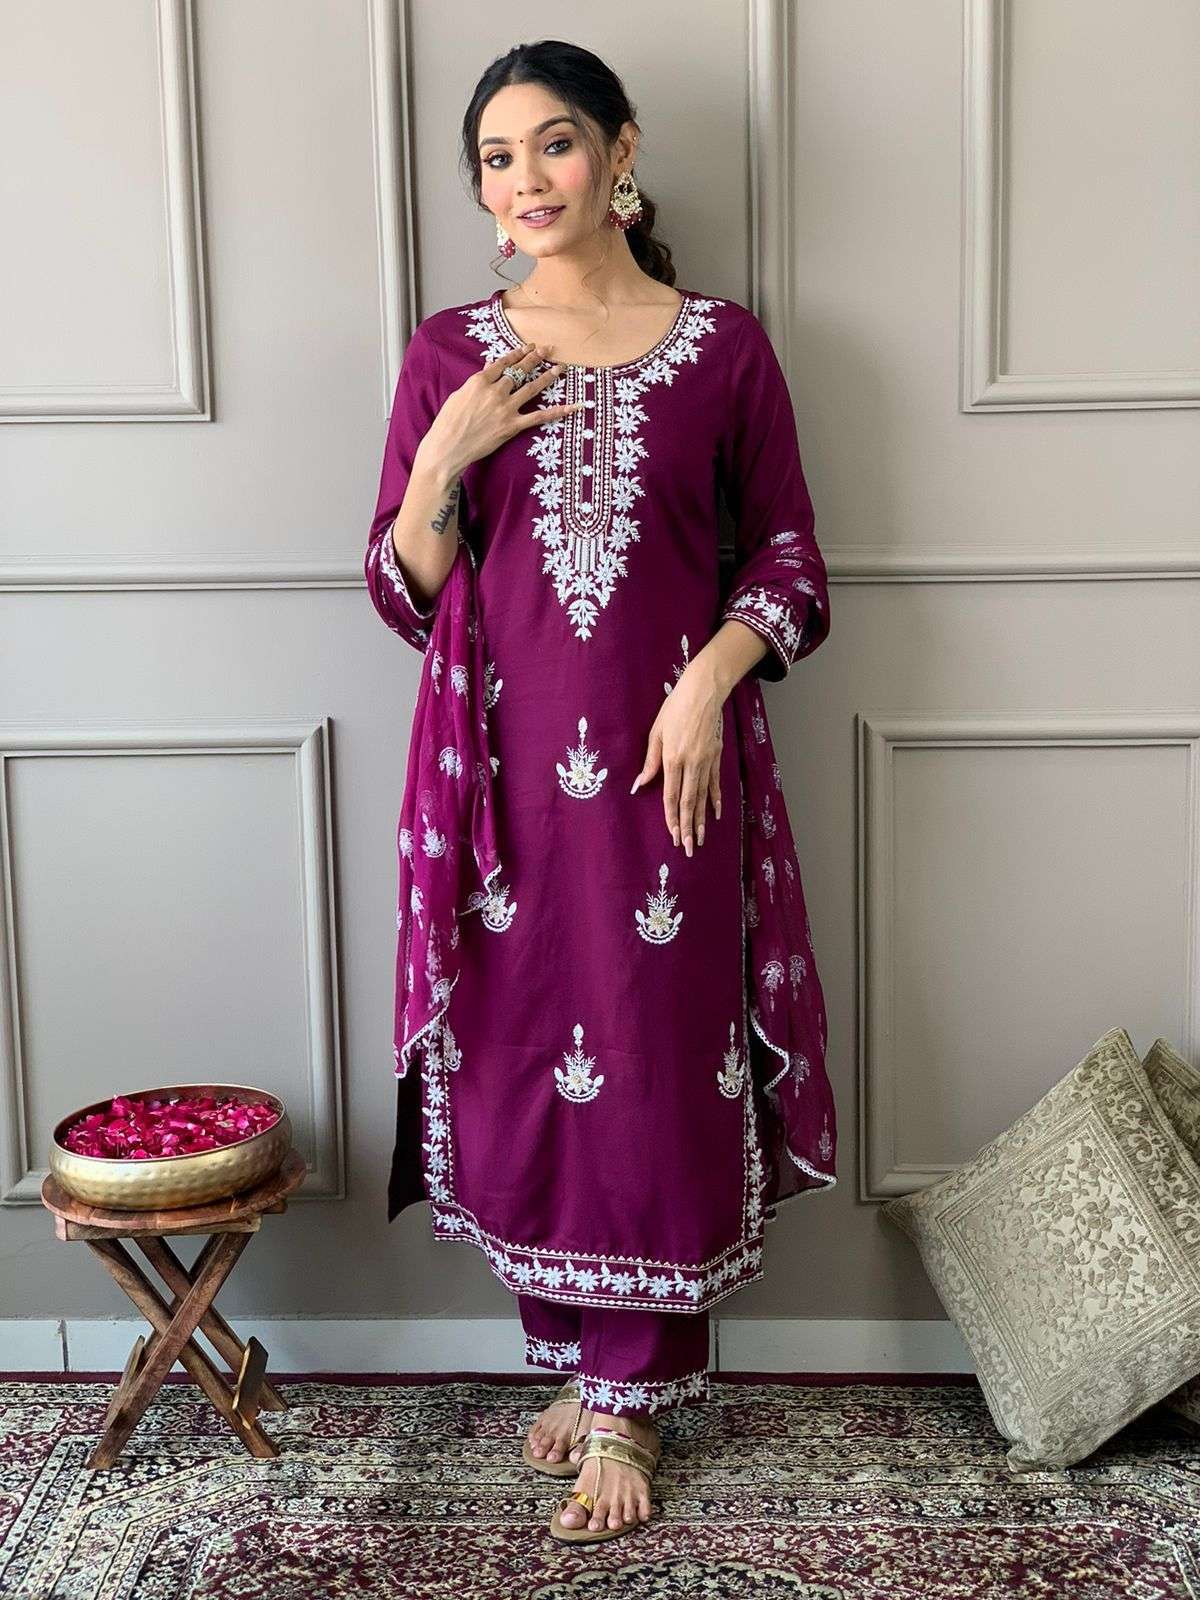  festival special new launch catalogue name sakira beautiful kurta with heavy embroidery lace work  on yoke along with pants with duppata special heavy embroidery design fabrictop rayon fabric